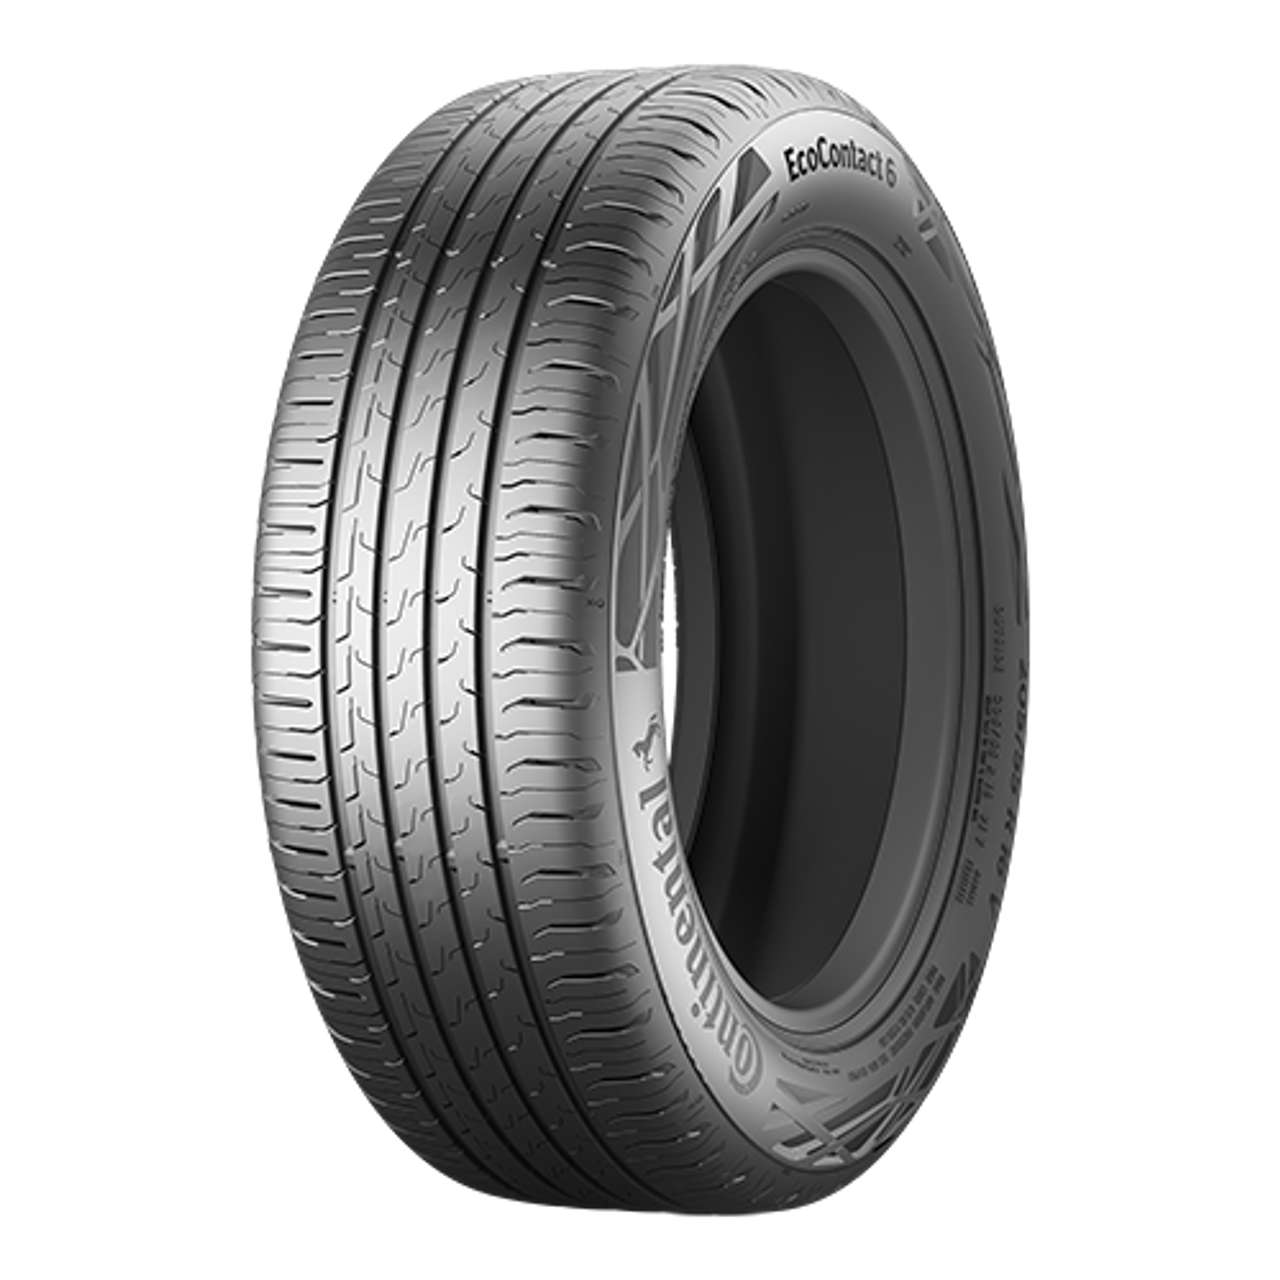 CONTINENTAL ECOCONTACT 6 (EVc) 195/65R15 91V von Continental